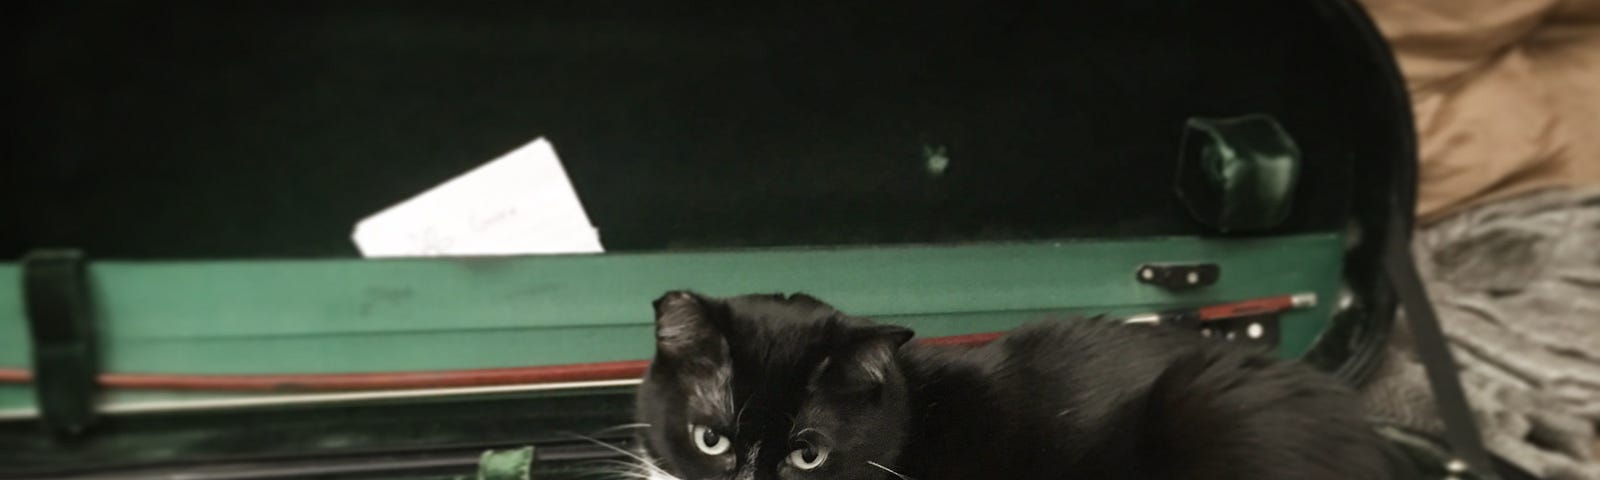 A tuxedo cat sitting in a string instrument case